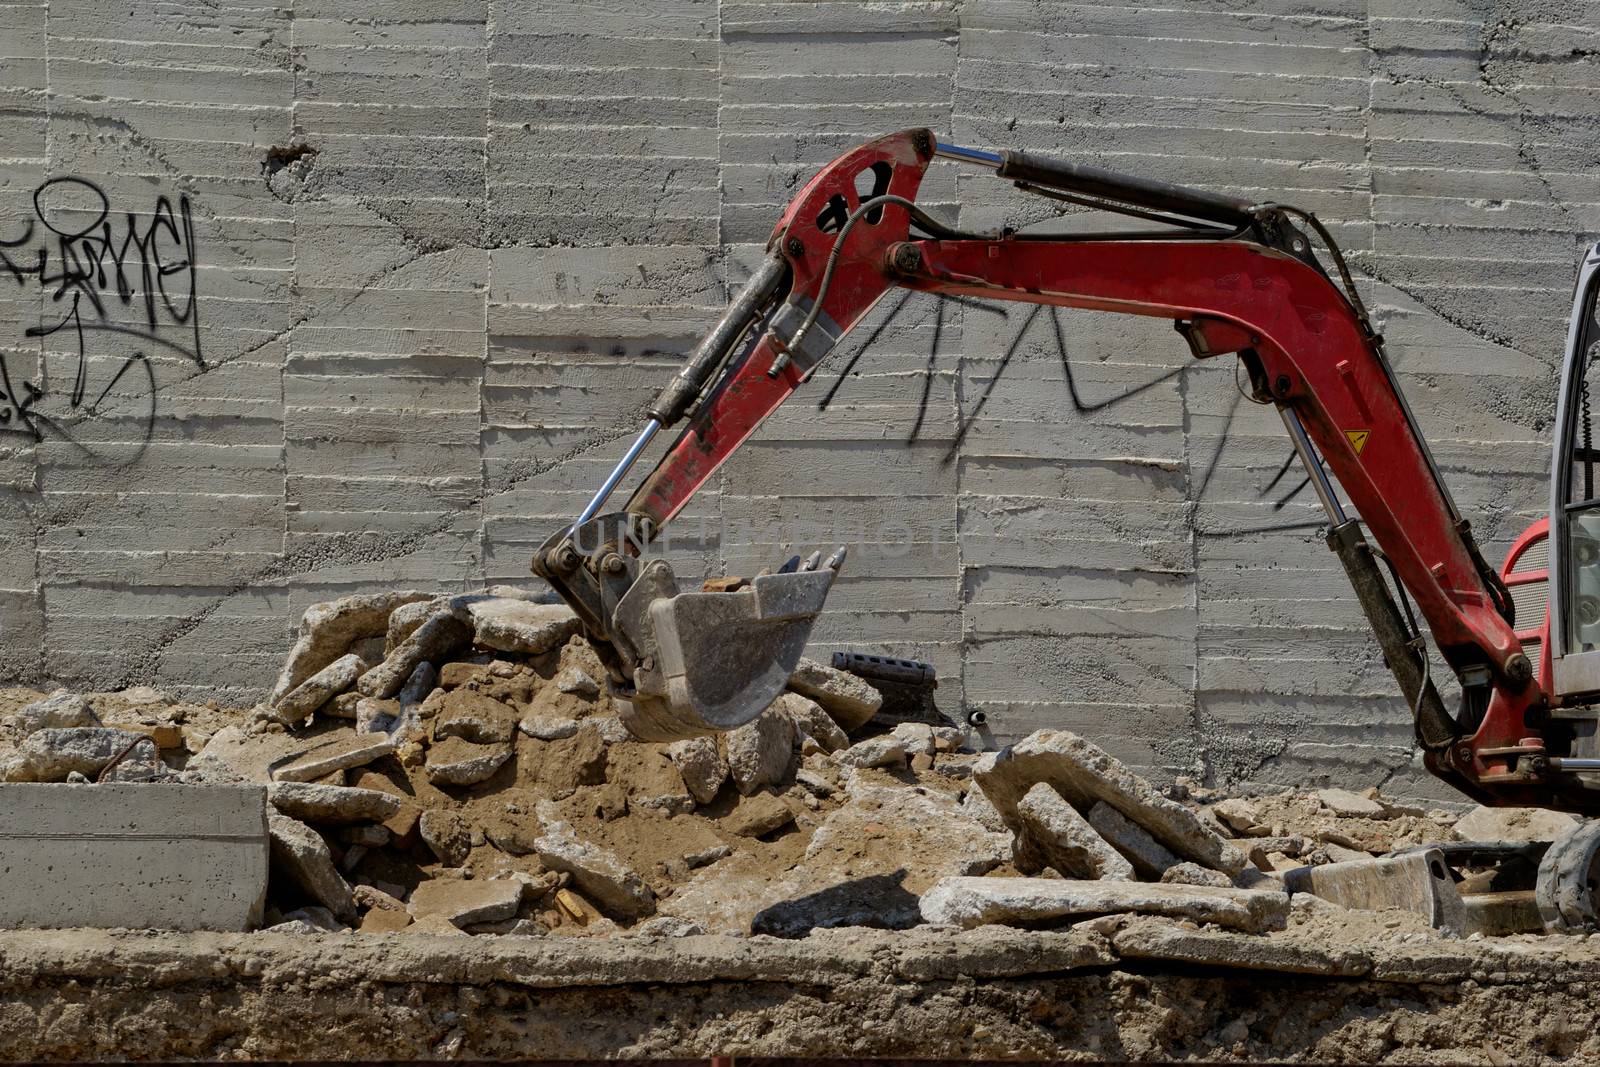 the excavator working on a construction site